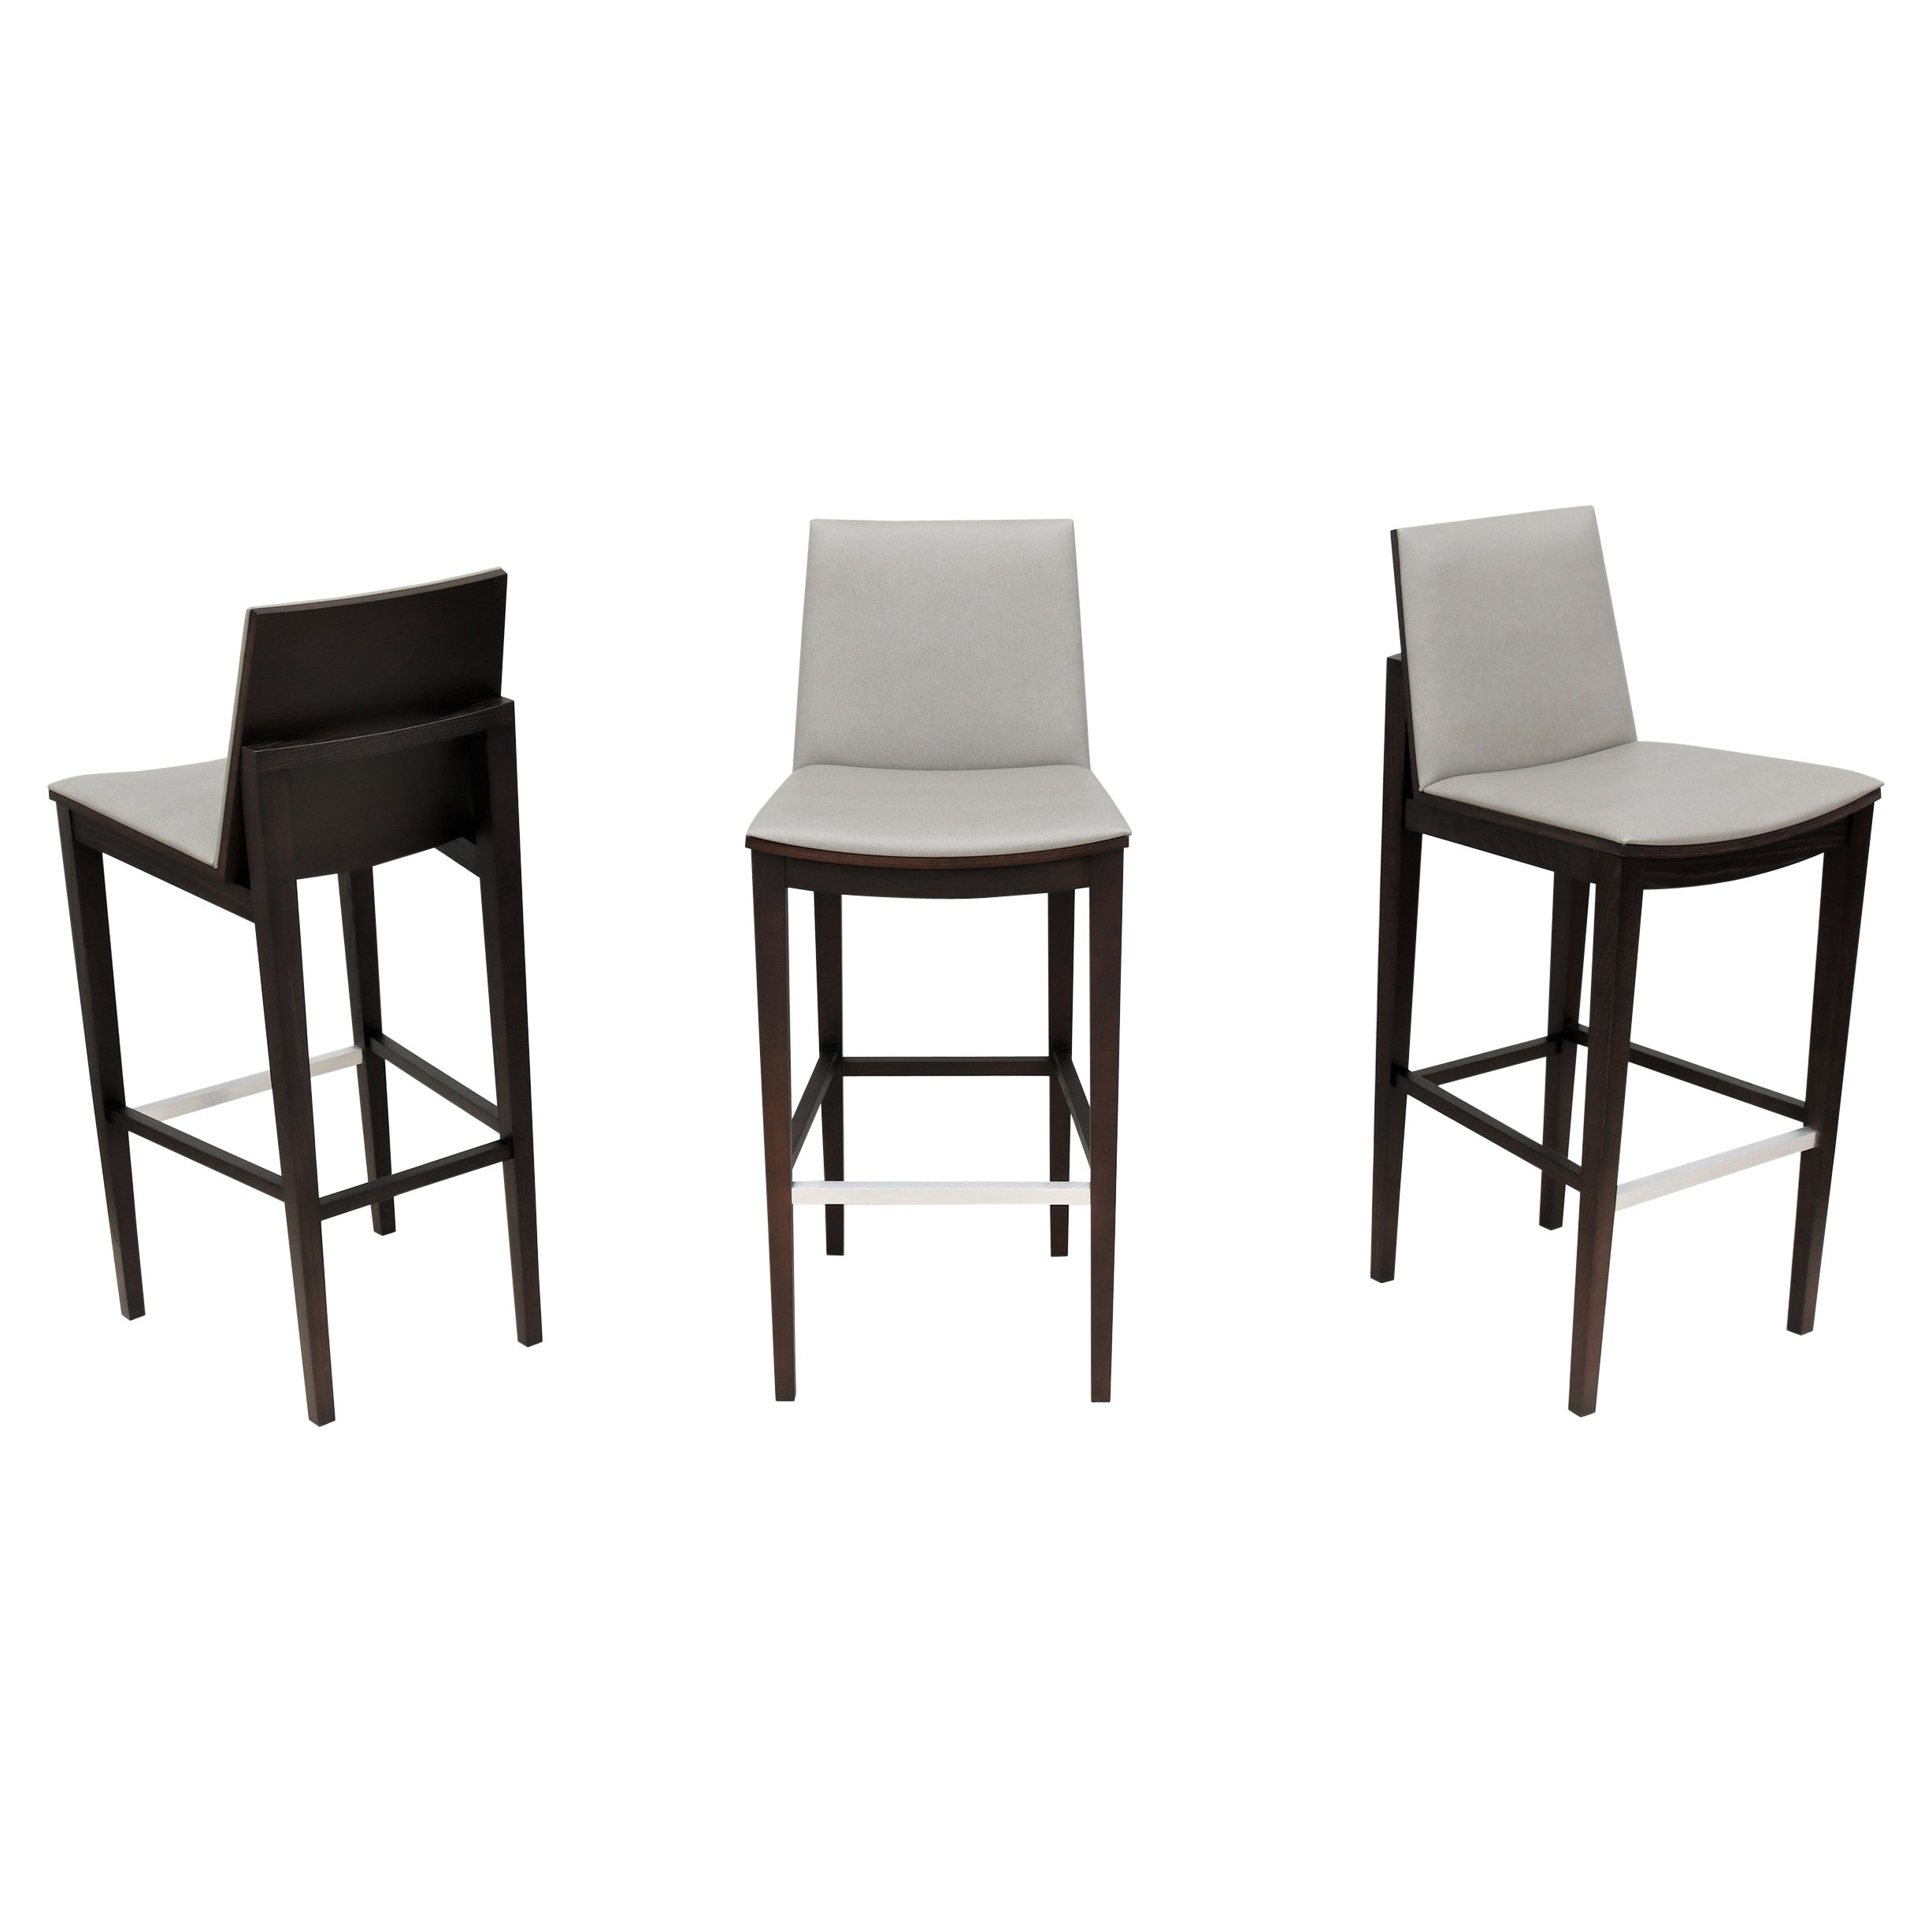 Contemporary Modern Kevin Stark for Hbf Ash Wood Carlyle Barstool, Set of 3 For Sale